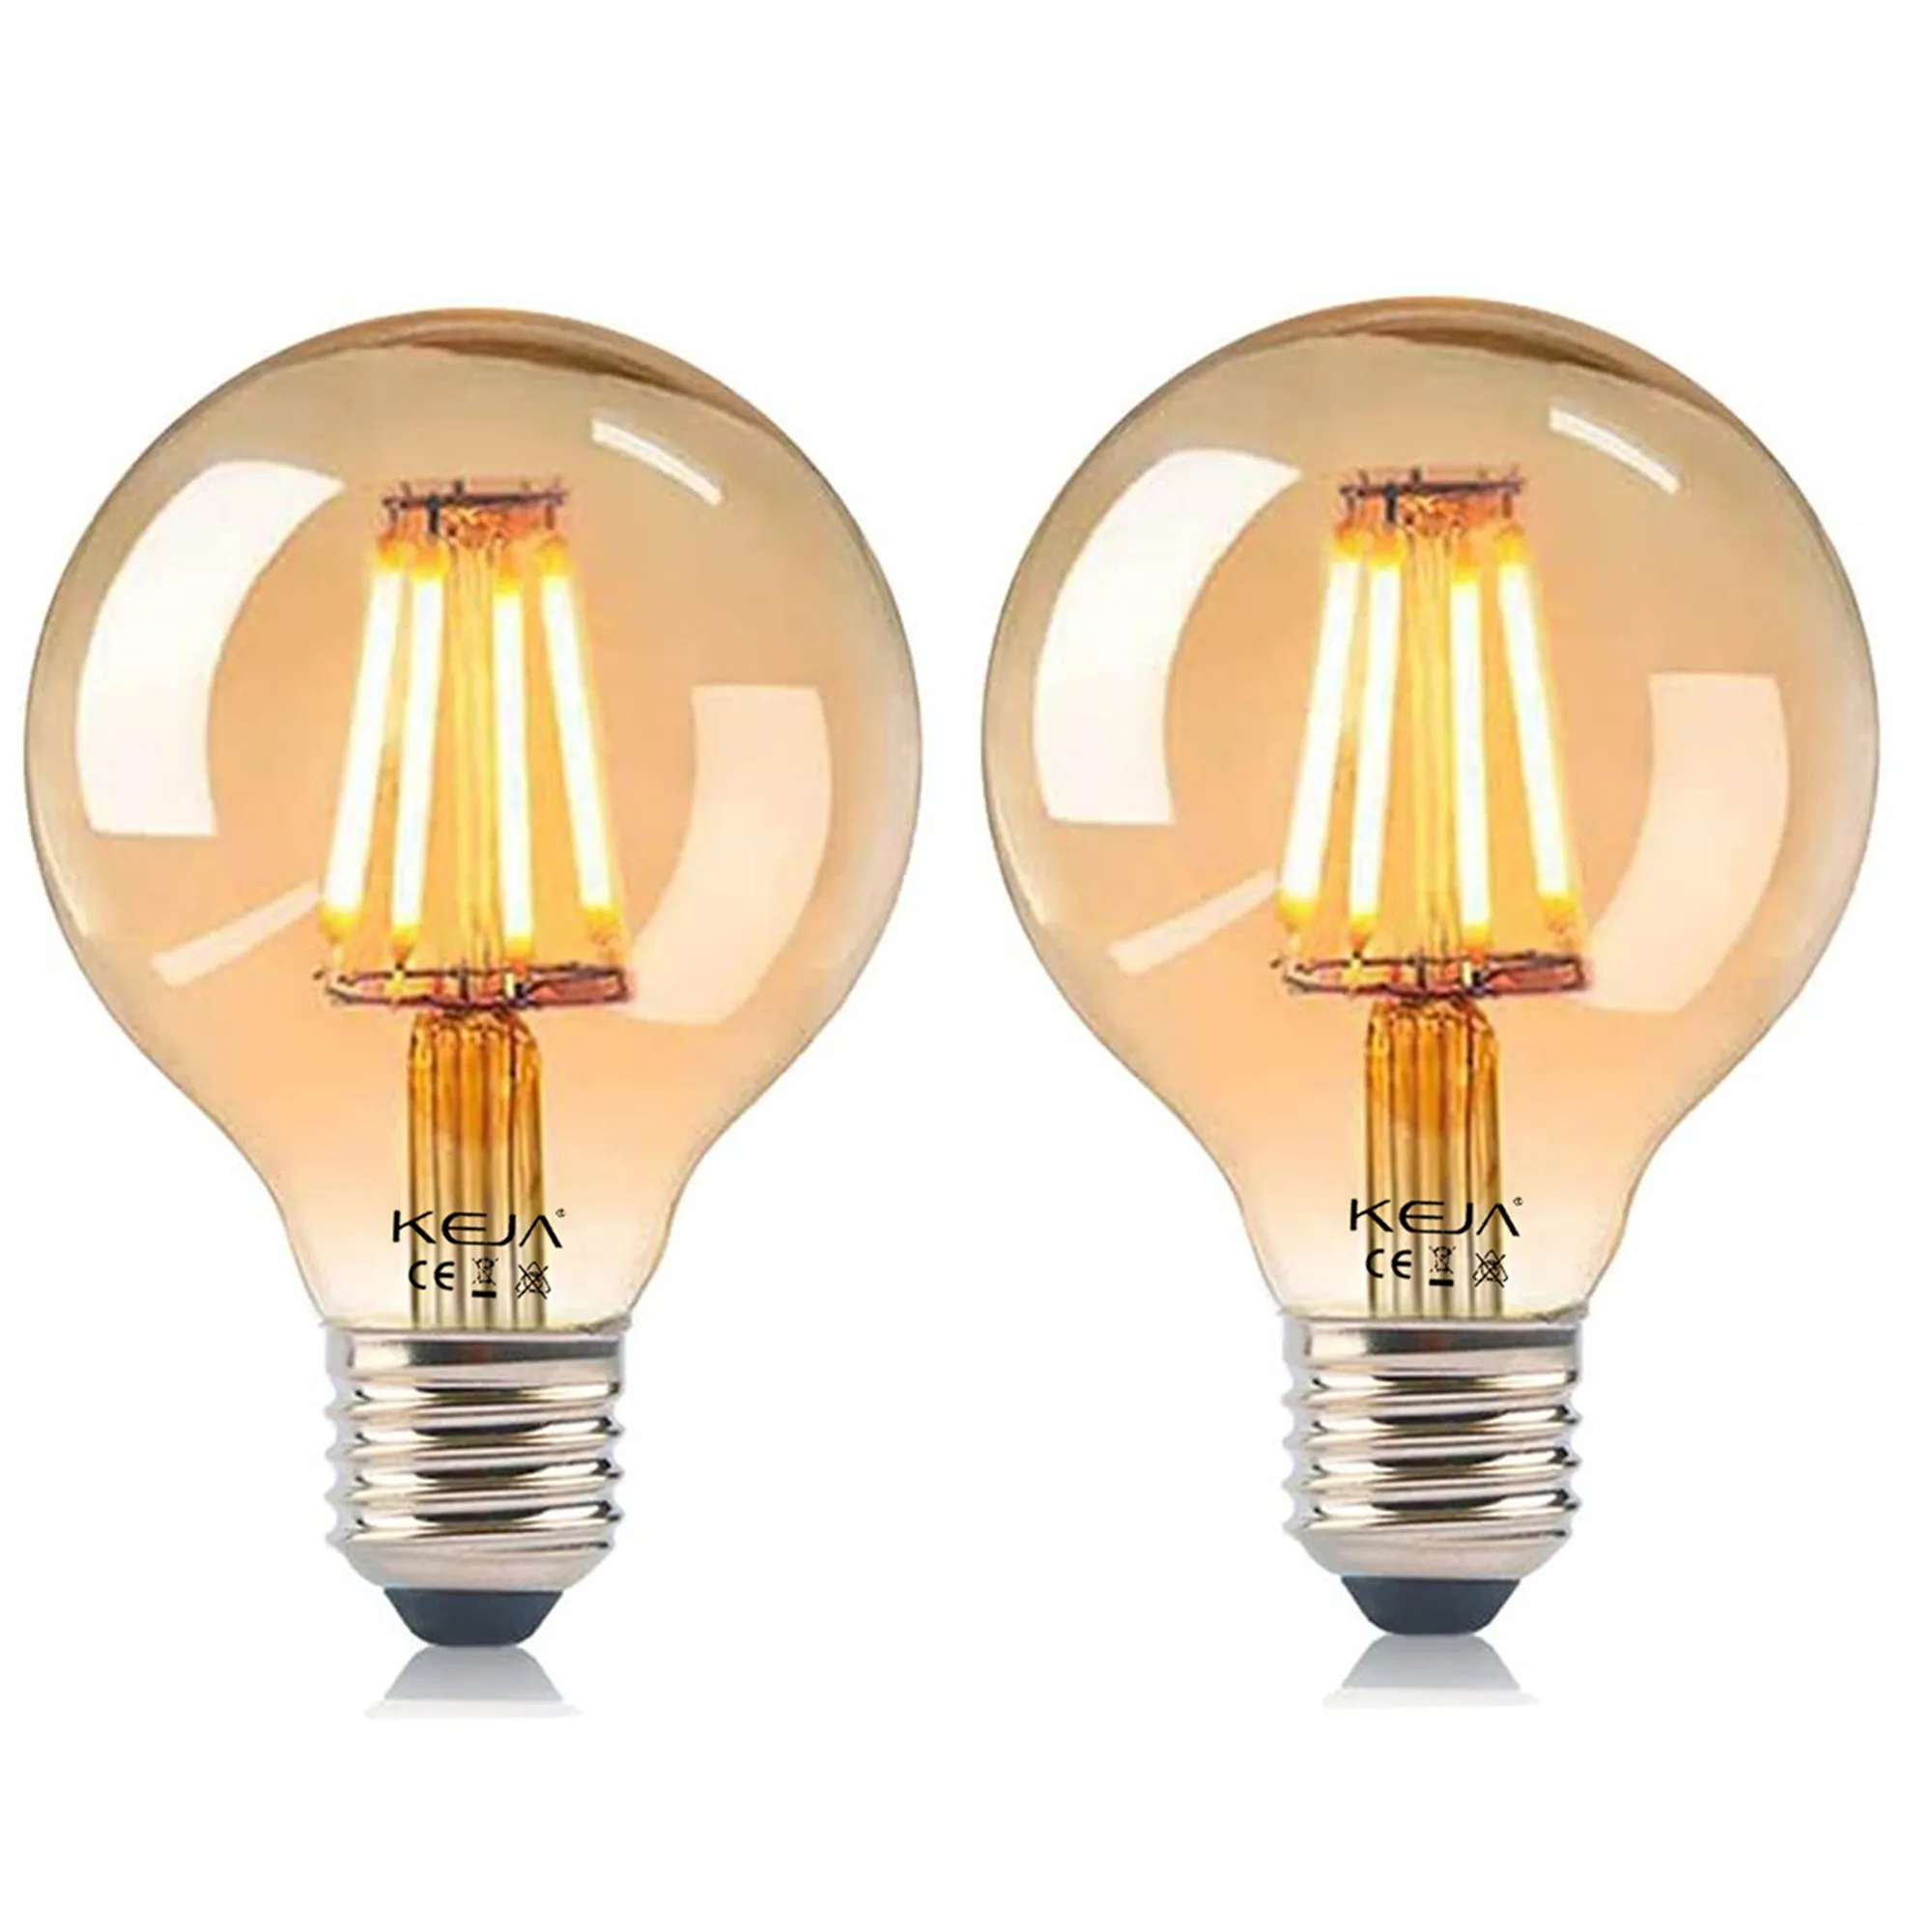 LED G80 E27 4W bulb amber cover filament lamp 2700K warm white 400LM Wholesale and retail selling in stock